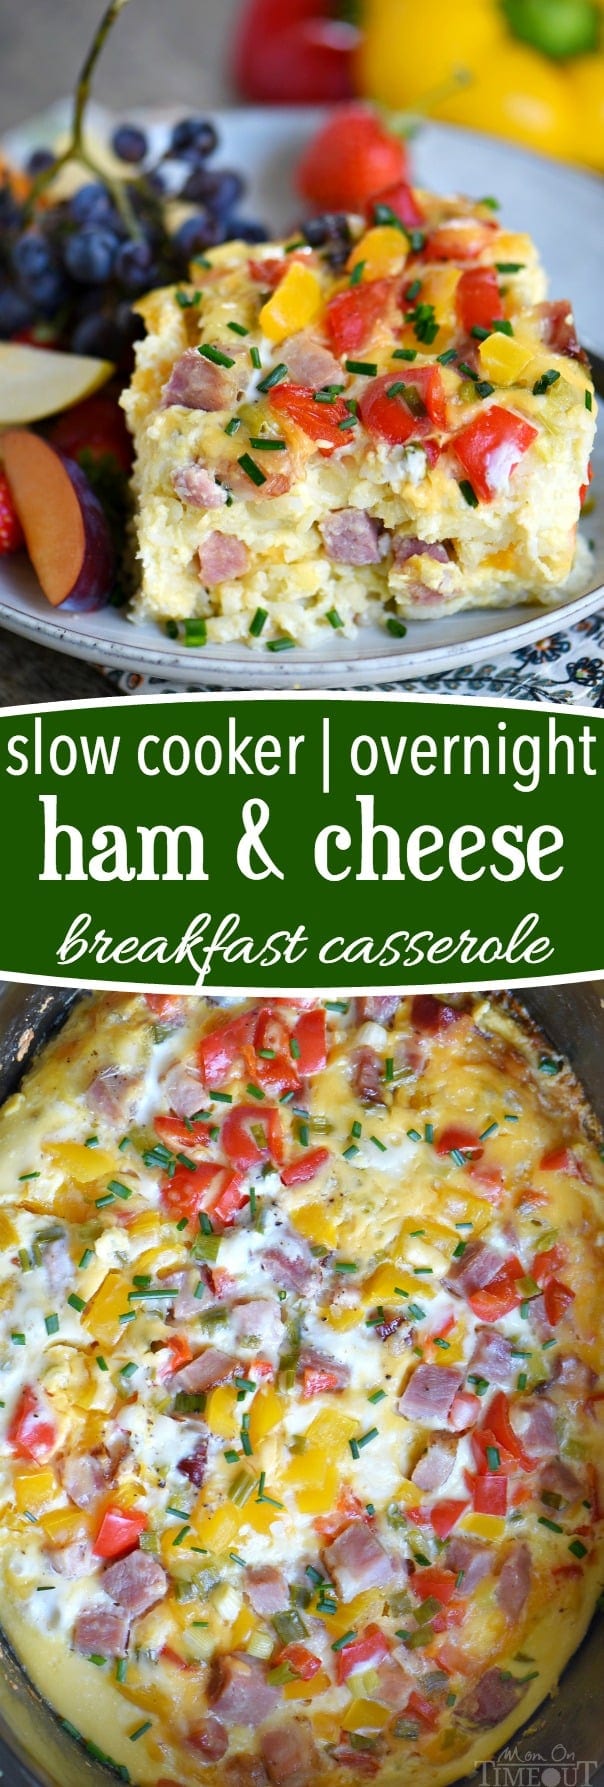 This Slow Cooker Overnight Ham and Cheese Breakfast Casserole is a great way to start your day! Loaded with ham, cheese, potatoes, bell peppers, and more, this casserole is perfect for busy weekday mornings, holidays, or Sunday brunch! // Mom On Timeout